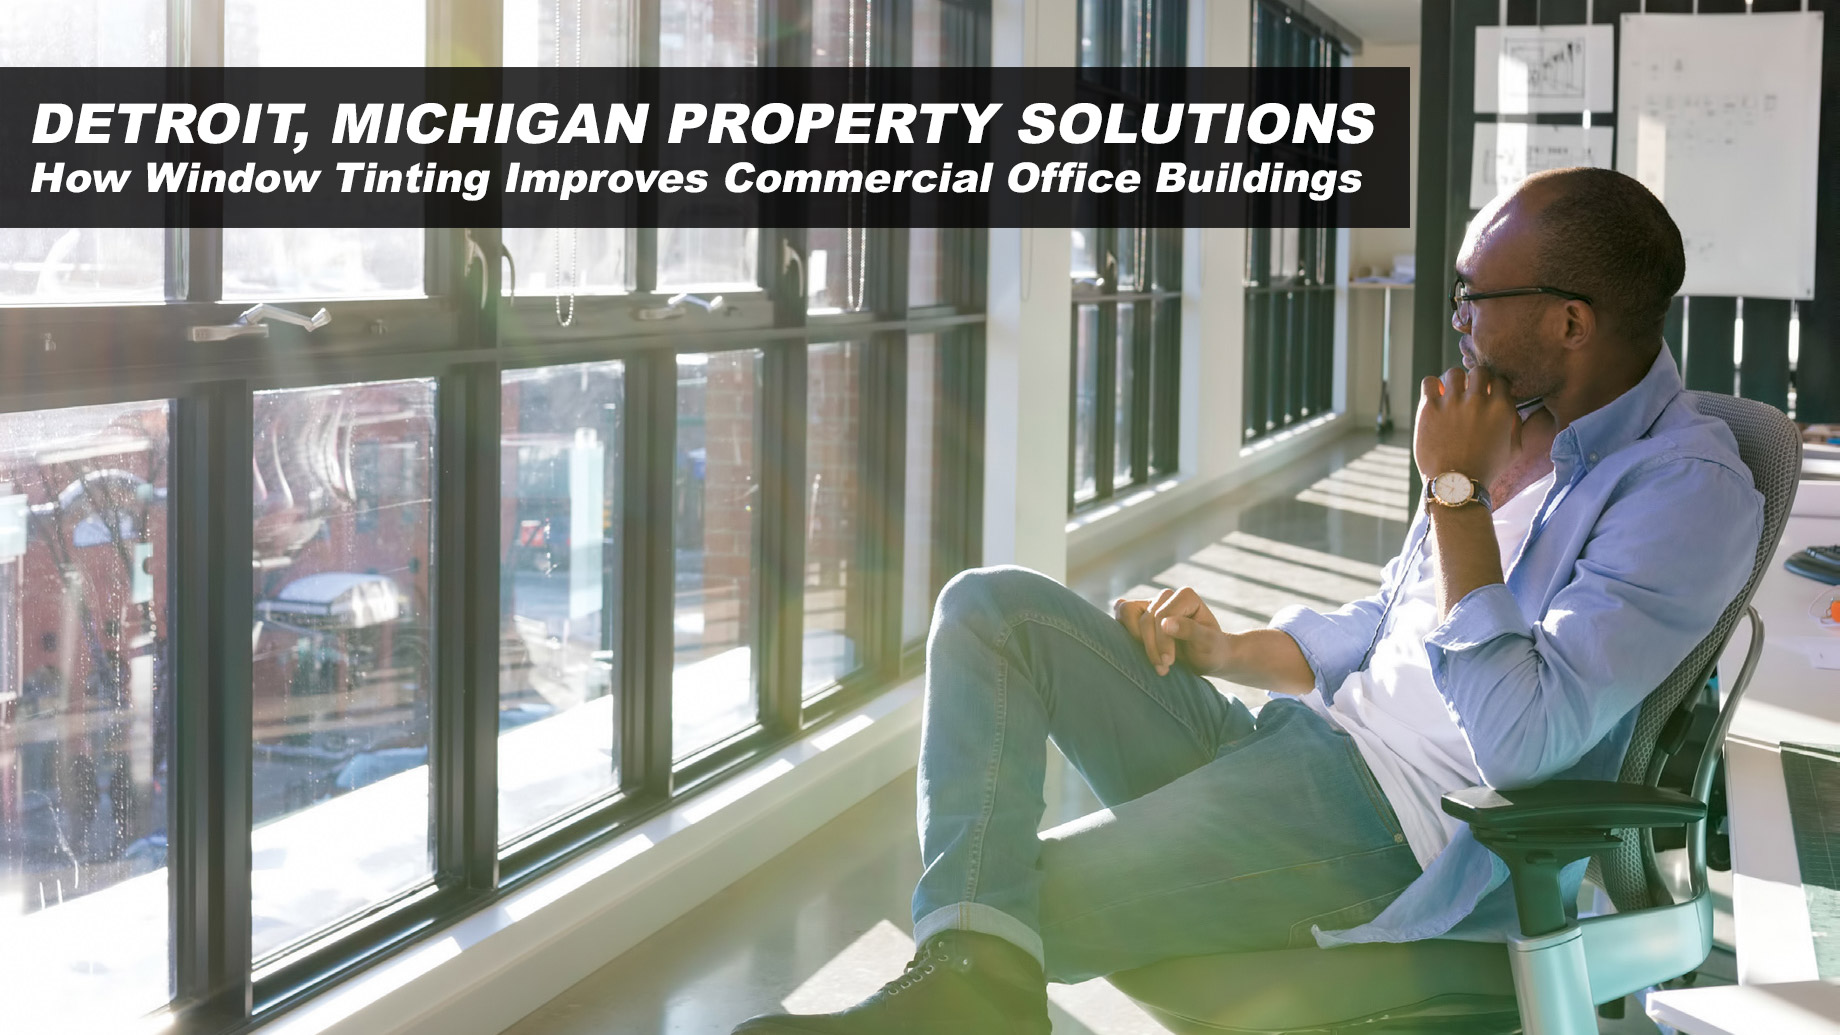 Detroit, Michigan Property Solutions - How Window Tinting Improves Commercial Office Buildings